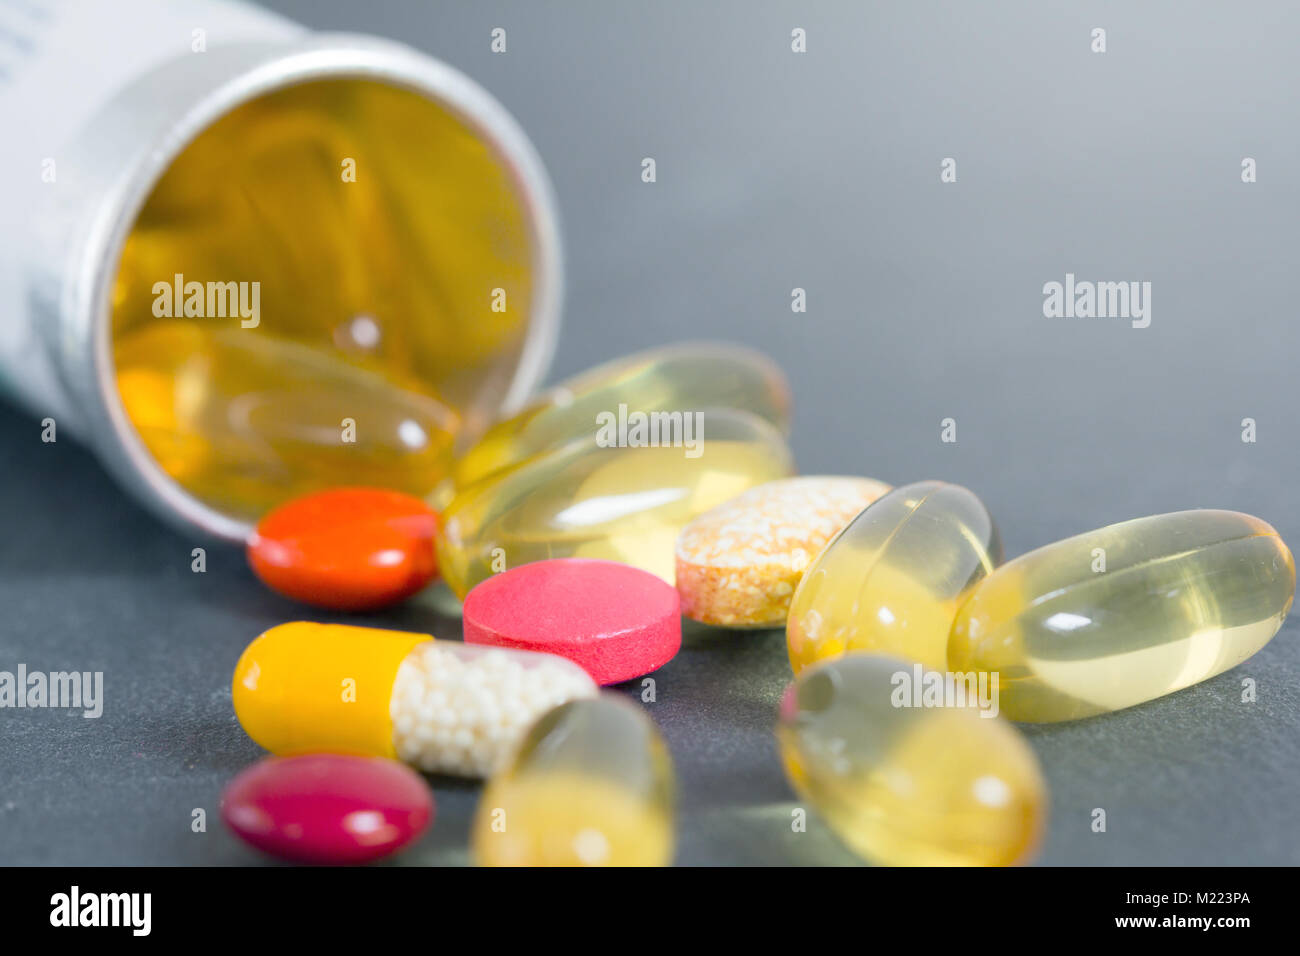 pharmaceutical pills spilled out of pill bottle closeup Stock Photo